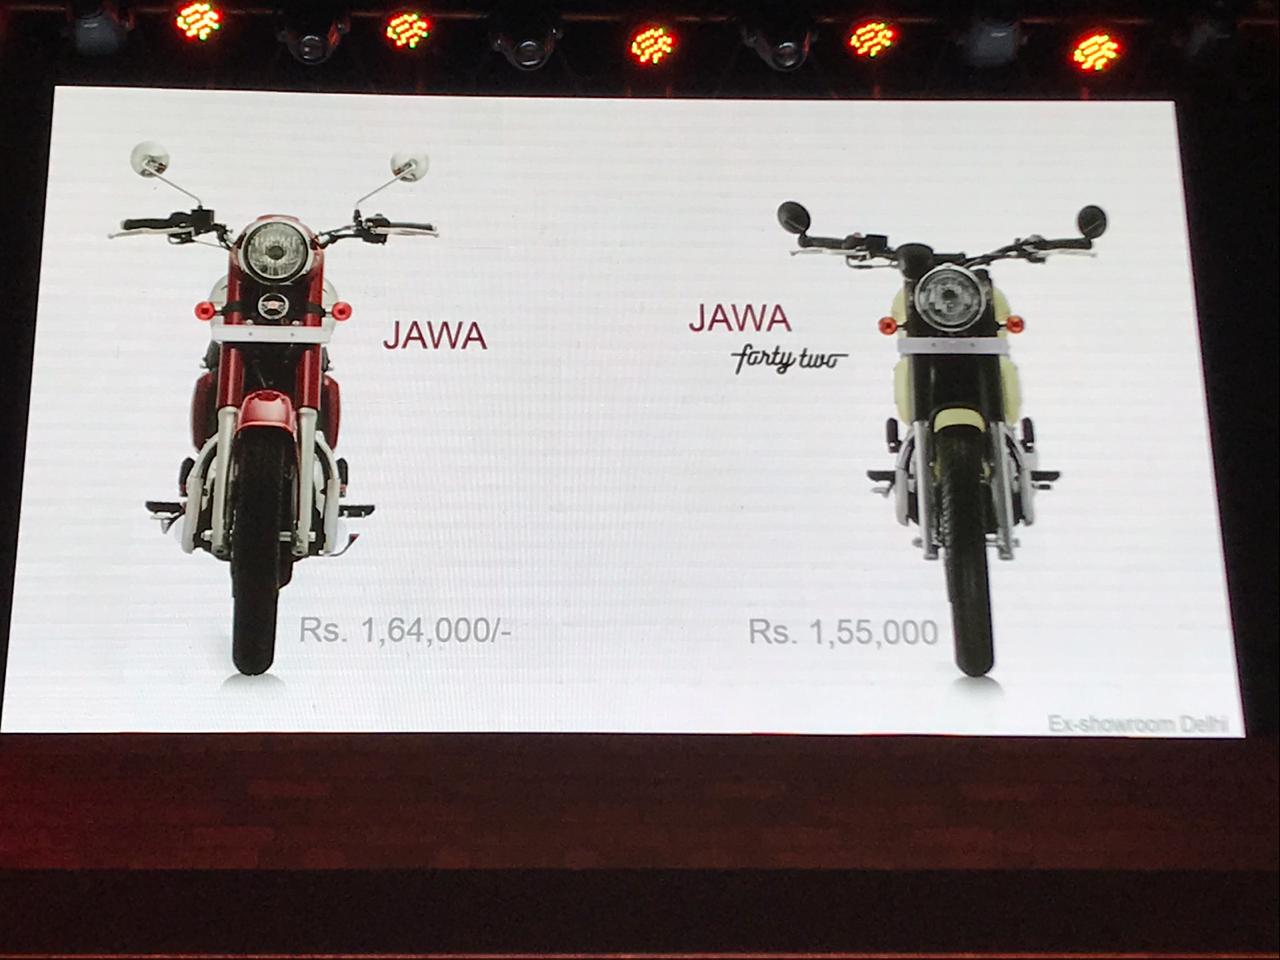 <p>The Jawa&nbsp;and Jawa&nbsp;Forty Two have been launched in India today. Ex Delhi prices are Rs 1.64 lakh and Rs 1.55 lakh. The perak will launch at later date&nbsp;at Rs 1.89 lakh</p>